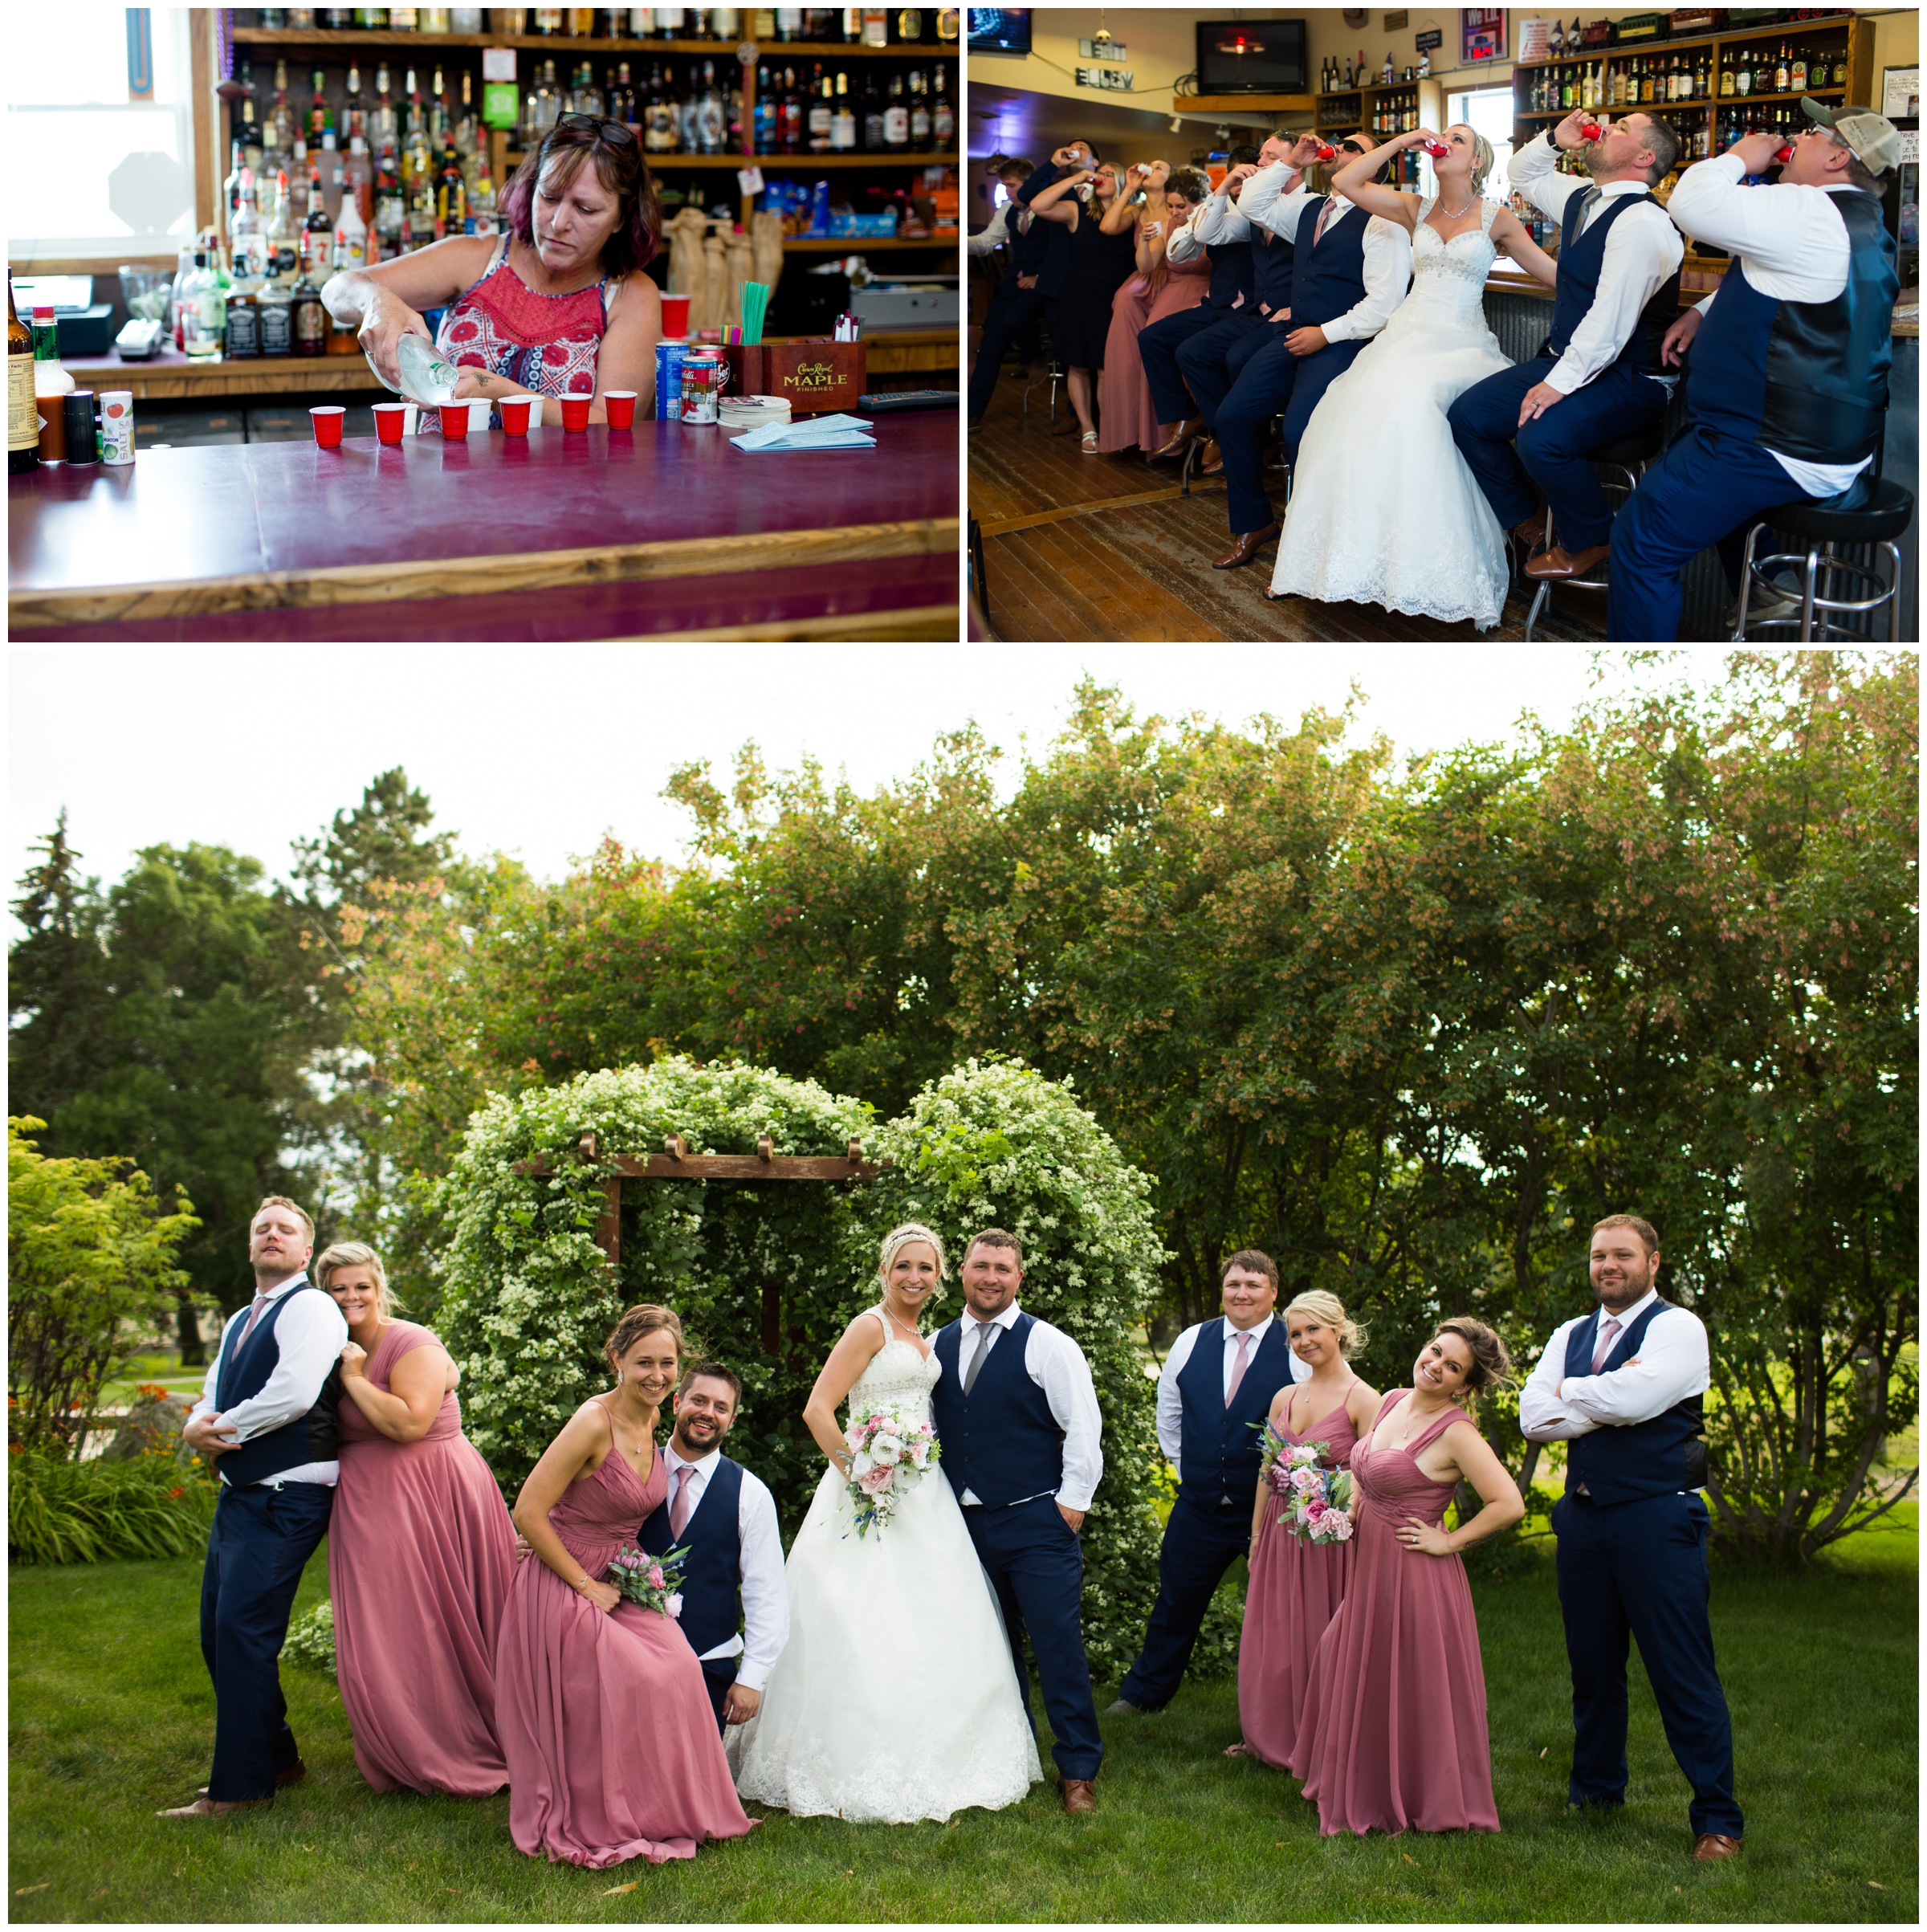 wedding party taking shots in a bar after ceremony 